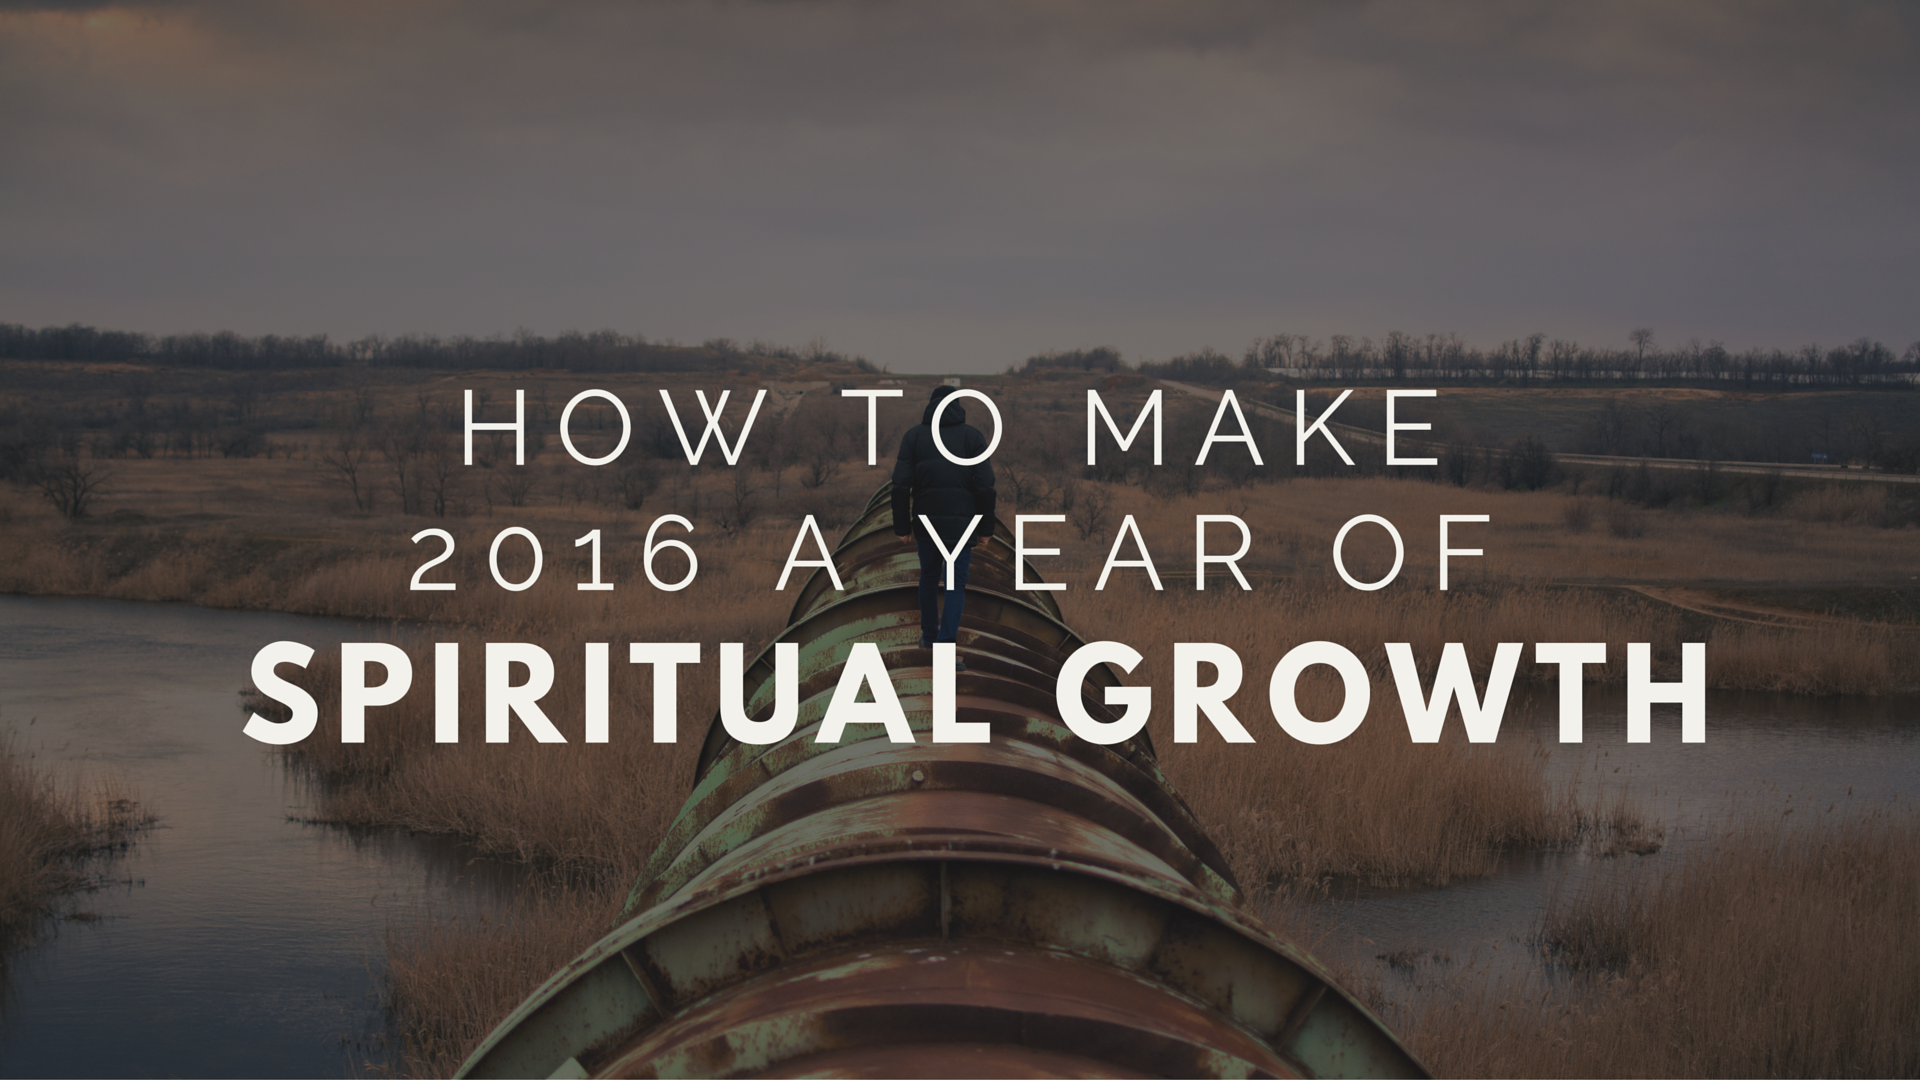 How to Make 2016 a Year of Spiritual Growth